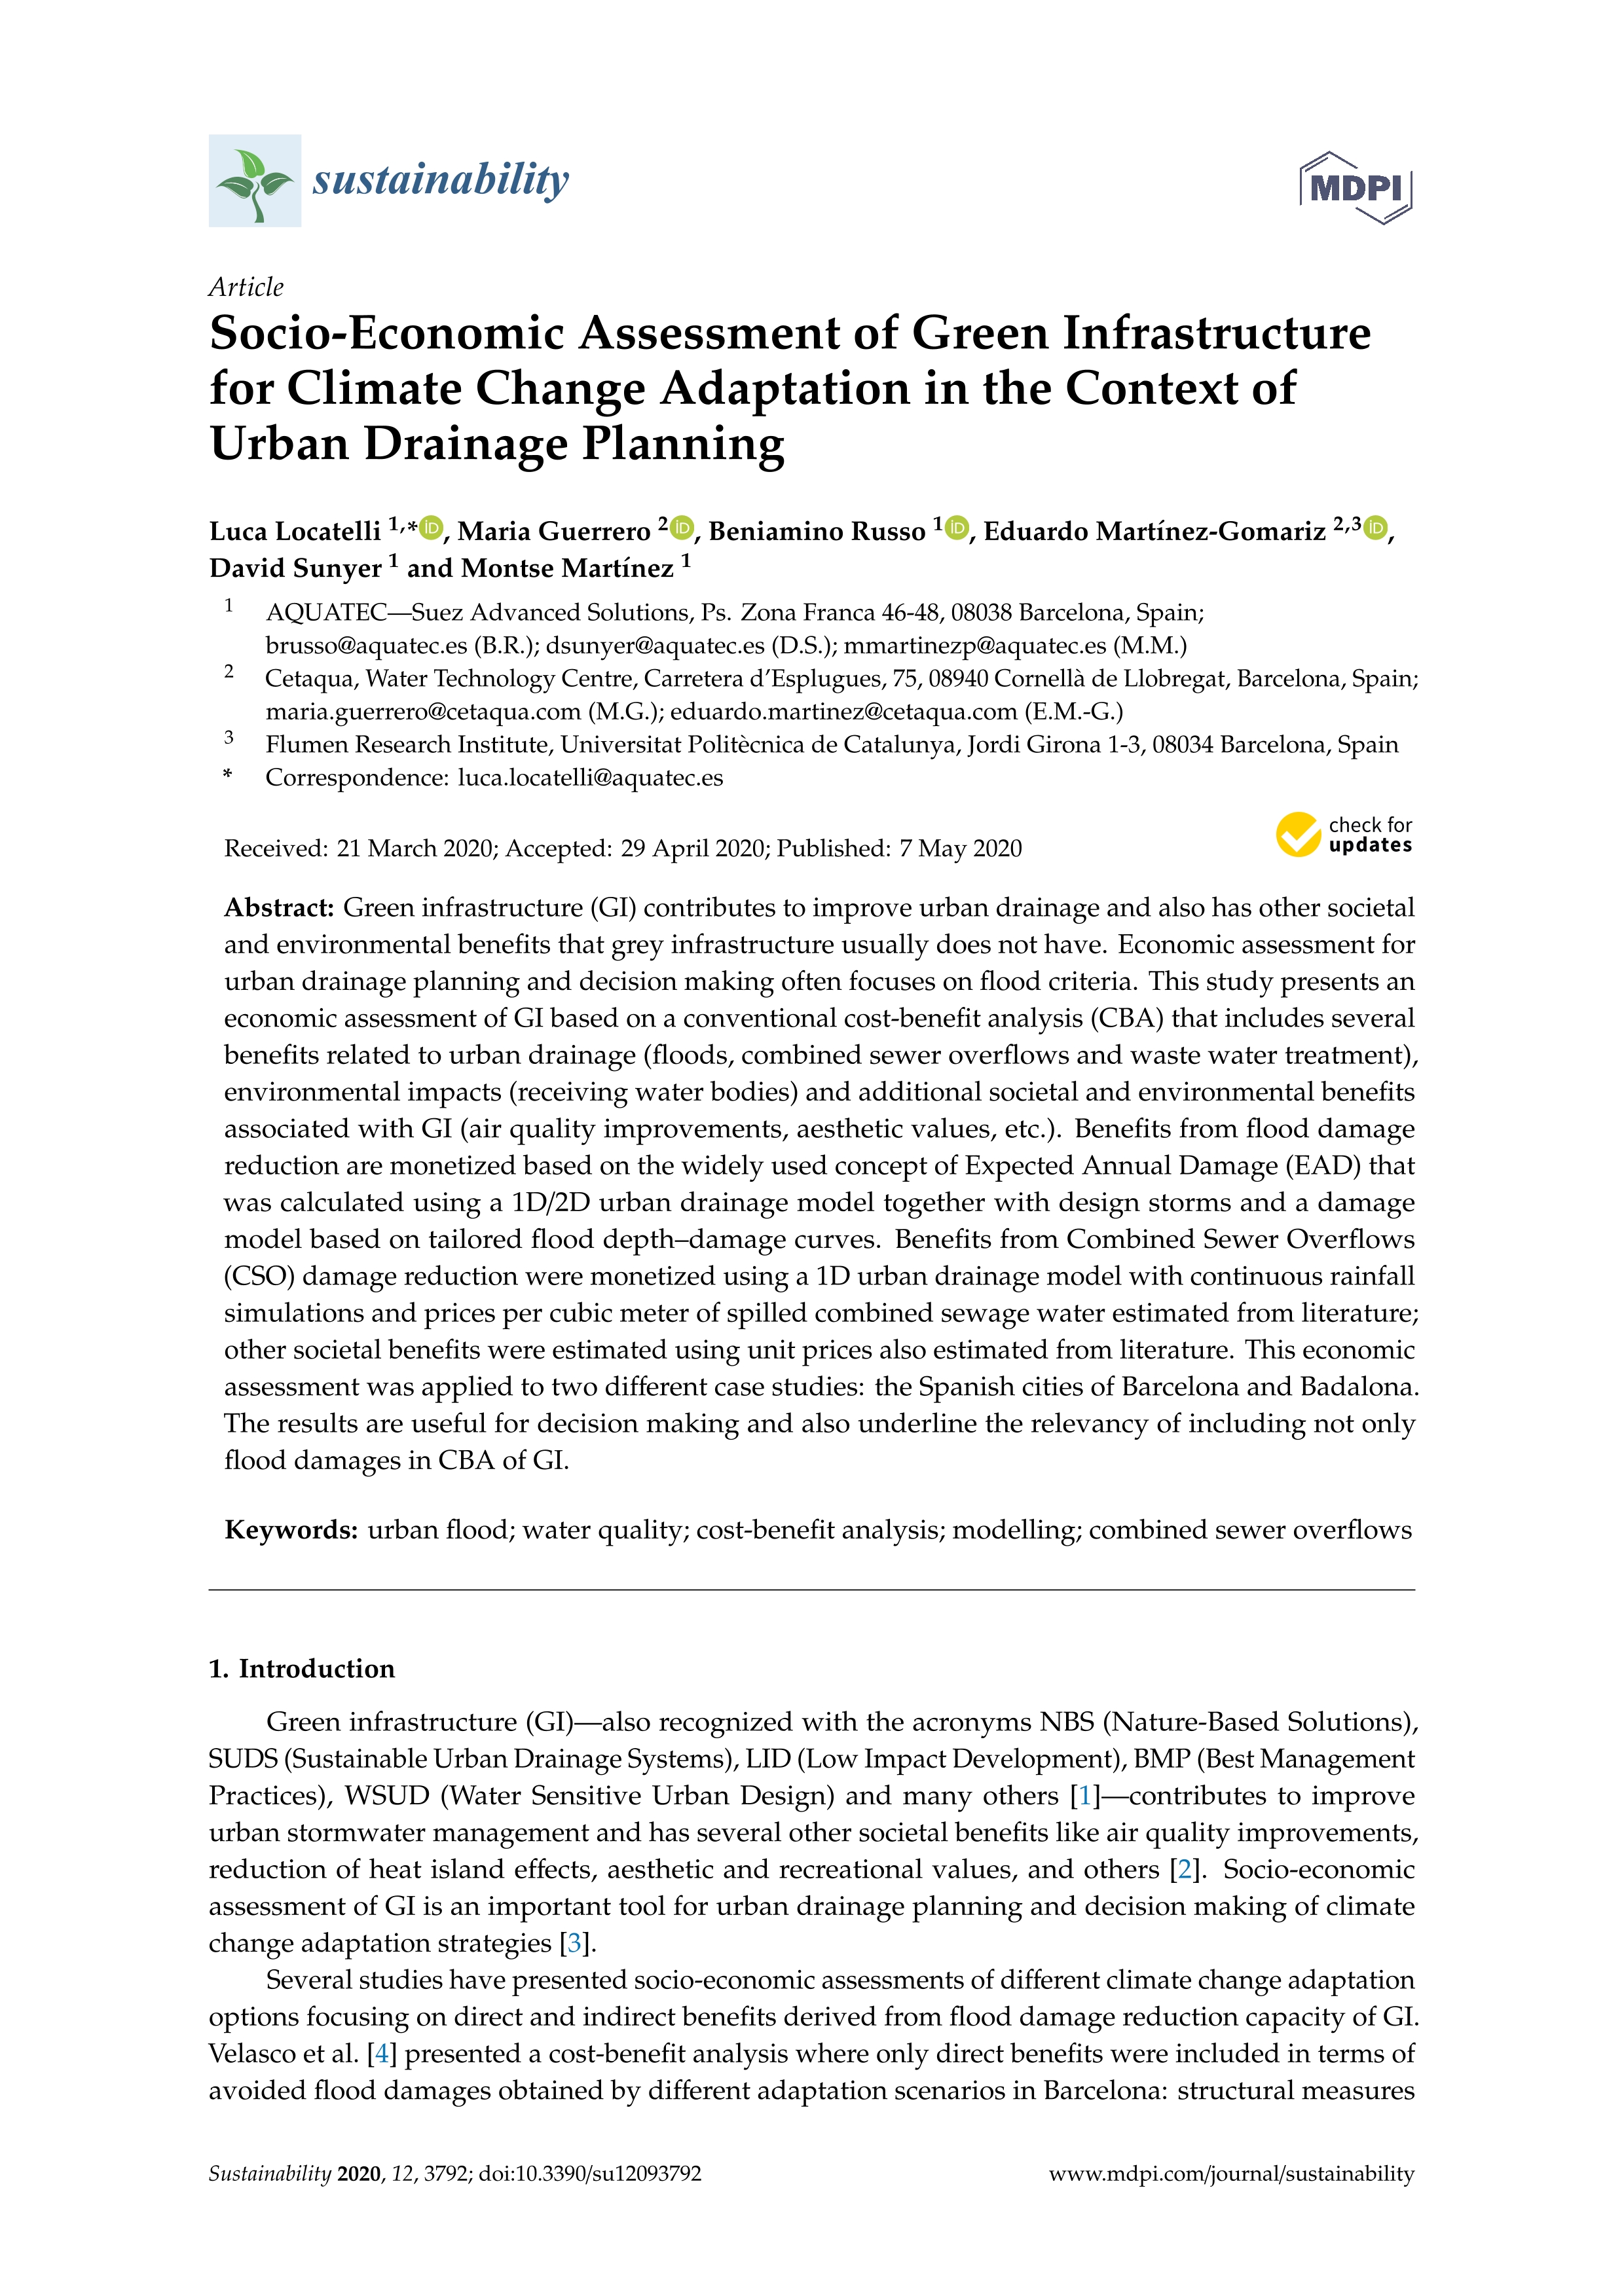 Socio-Economic Assessment of Green Infrastructure for Climate Change Adaptation in the Context of Urban Drainage Planning